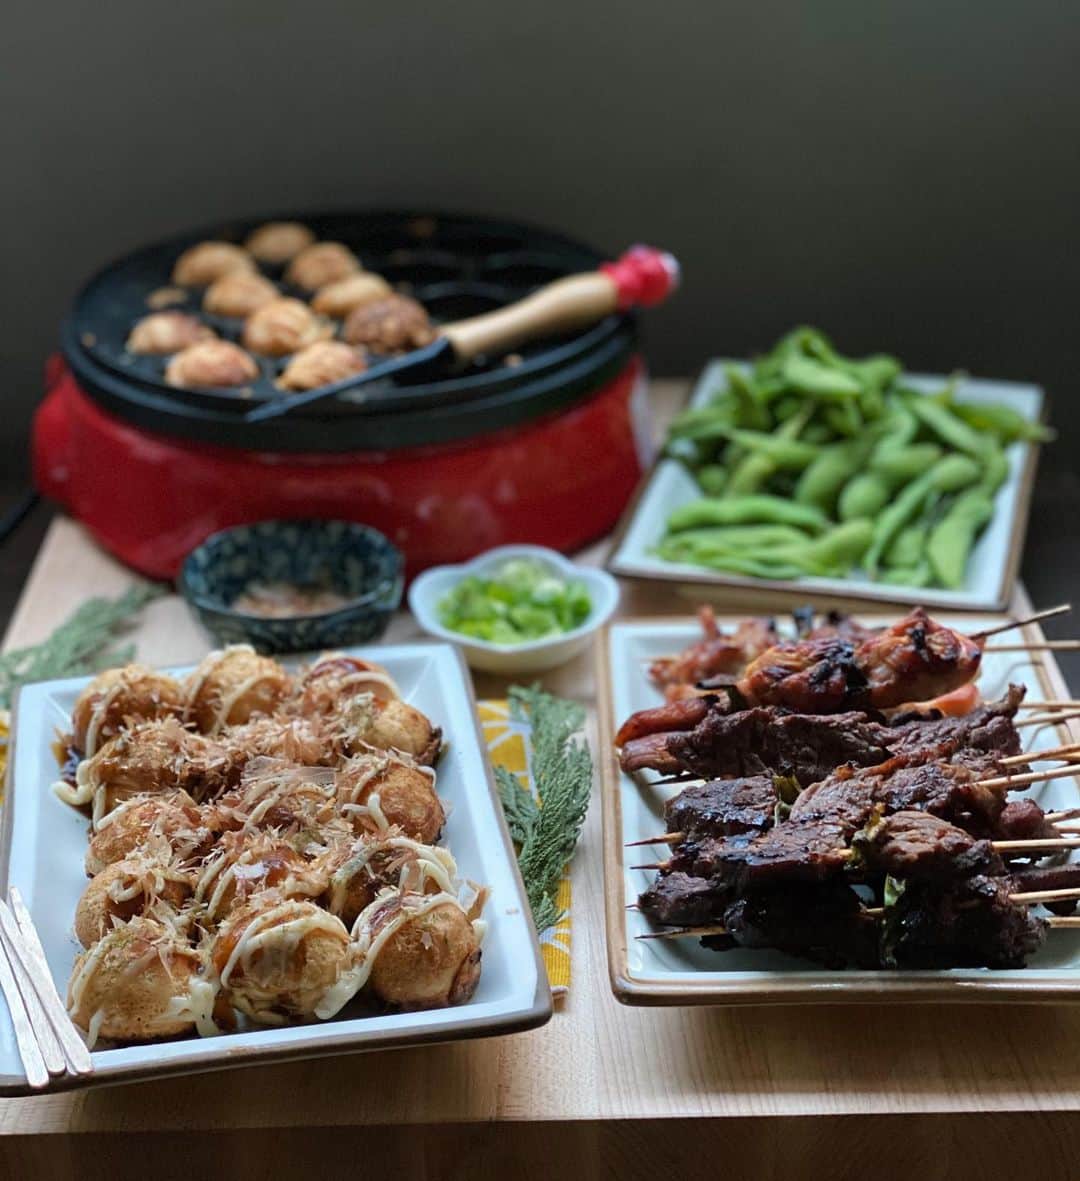 Antonietteのインスタグラム：「Welcomed the New Year with some Japanese street food! 🎊 Made takoyaki with the traditional octopus bits and a cheese only version for the kids. Also made yakitori by trying out the new charcoal grill and threw in some edamame for, “balance”. 😝 Felt like I was in Osaka for a hot minute, but rather than having the large, Glico Man sign blinding my eyes, was the flicker of my Christmas tree lights instead.🎄 😆Might not be the most traditional of meals to kick off the New Year, but as we’ve learned in 2020, it was and still is a time to rethink those rituals and customs that have always been a part of our lives...and to start anew! This is definitely a keeper, and as with all finger foods 👐🏽a fun way to start off the year. 🥳」